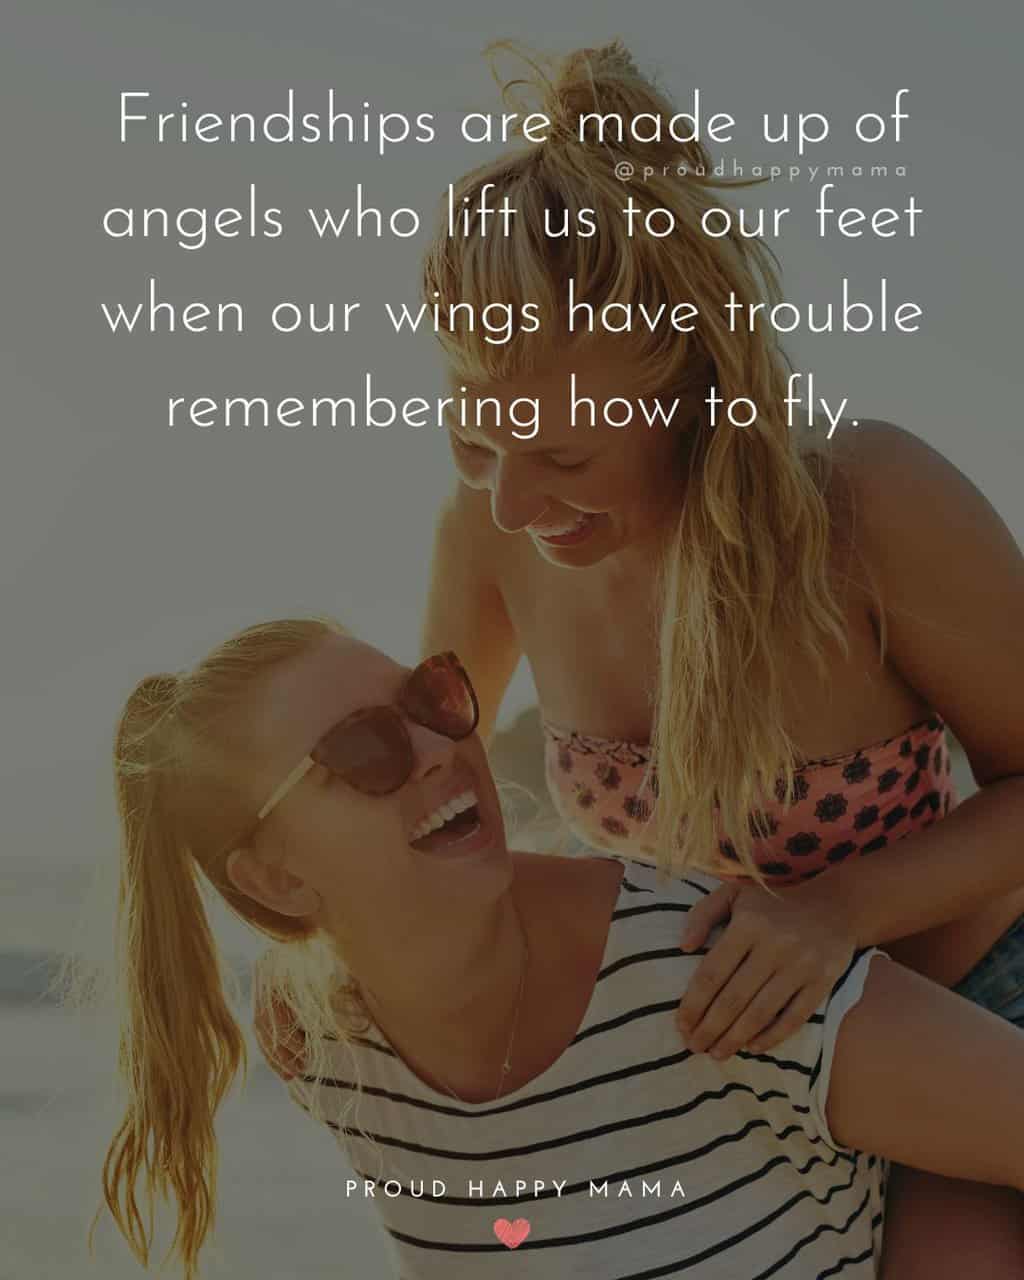 Friend piggy backing friend with short meaningful friendship quote text overlay. ‘Friendships are made up of angels who lift us to our feet when our wings have trouble remembering how to fly.’